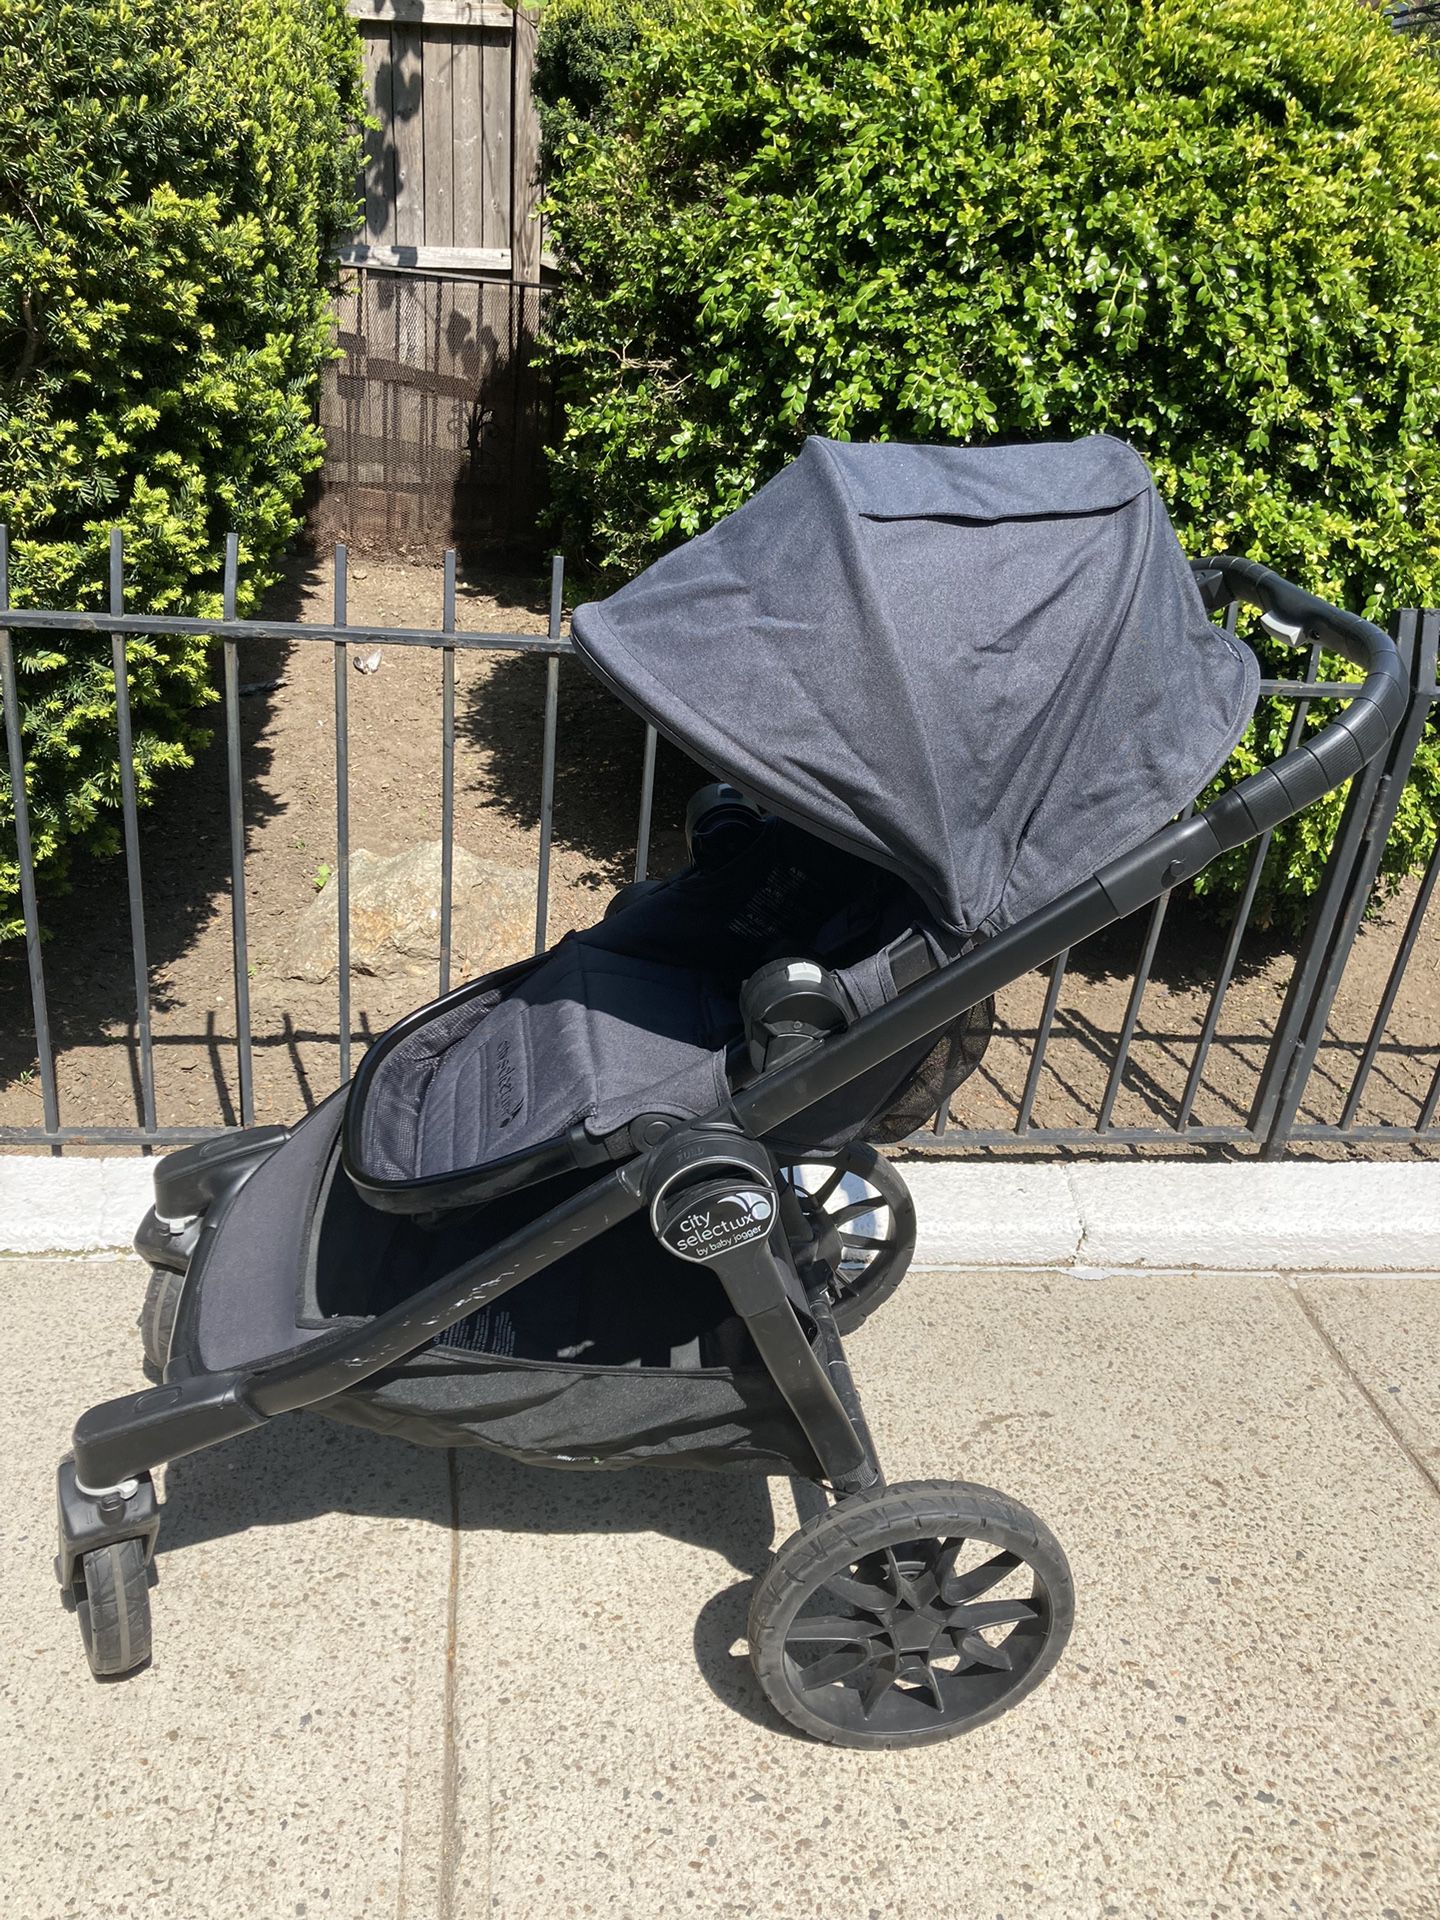 Baby Jogger City Select Stroller for Sale in Queens, NY - OfferUp